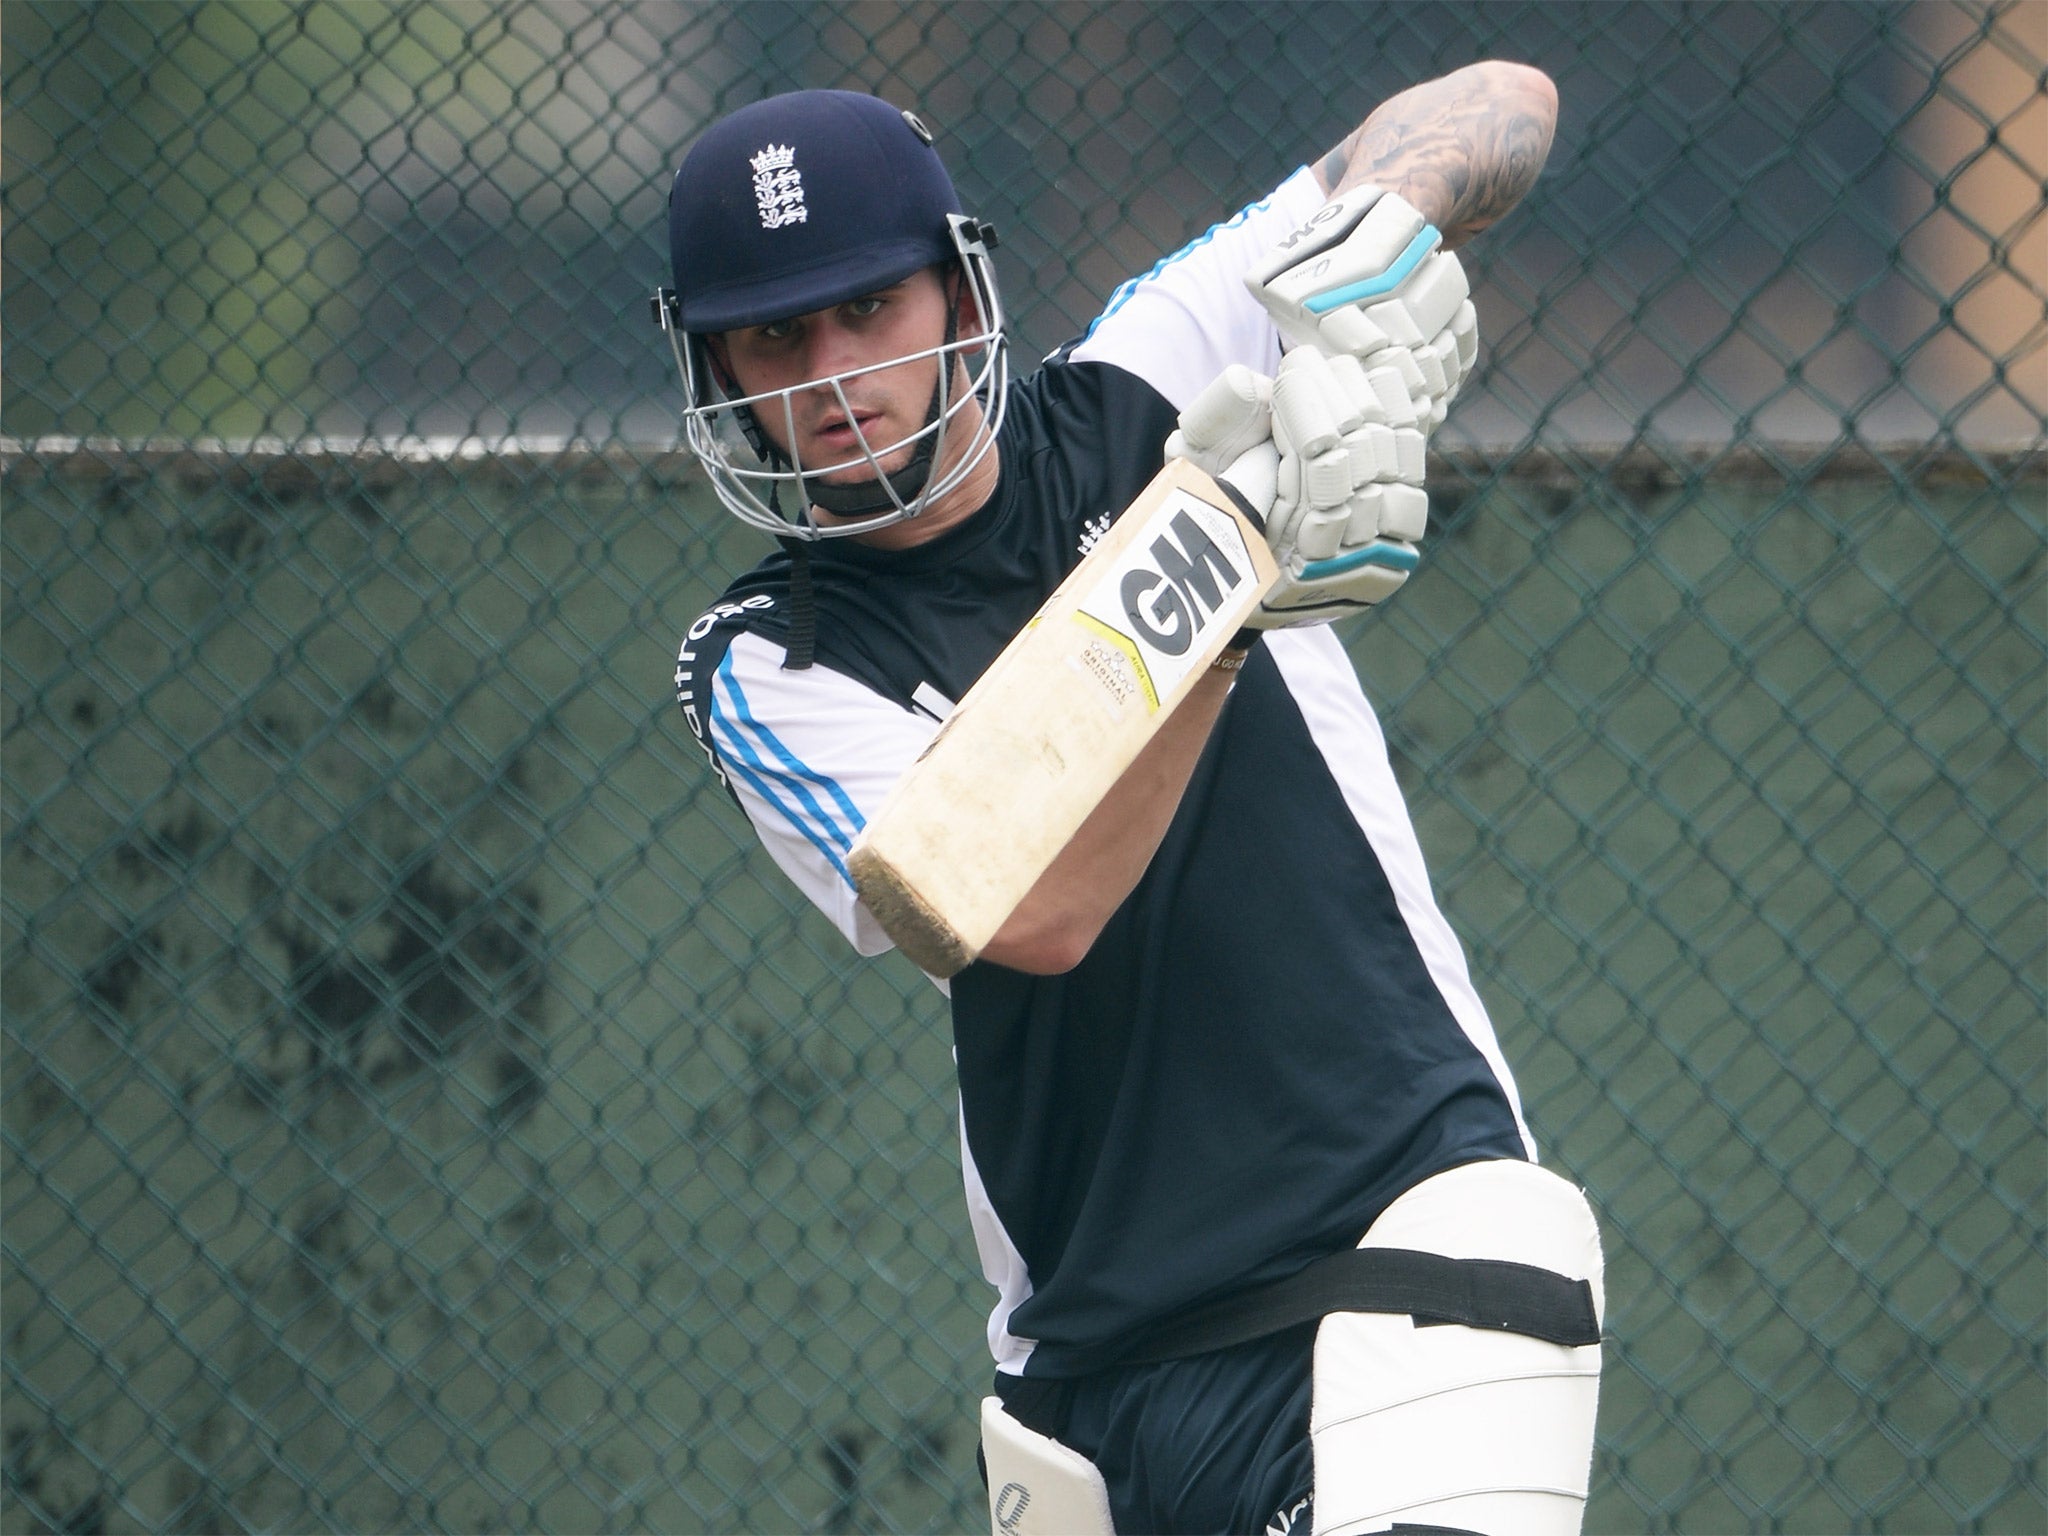 &#13;
Alex Hales is favourite to open the batting with Alastair Cook (Getty)&#13;